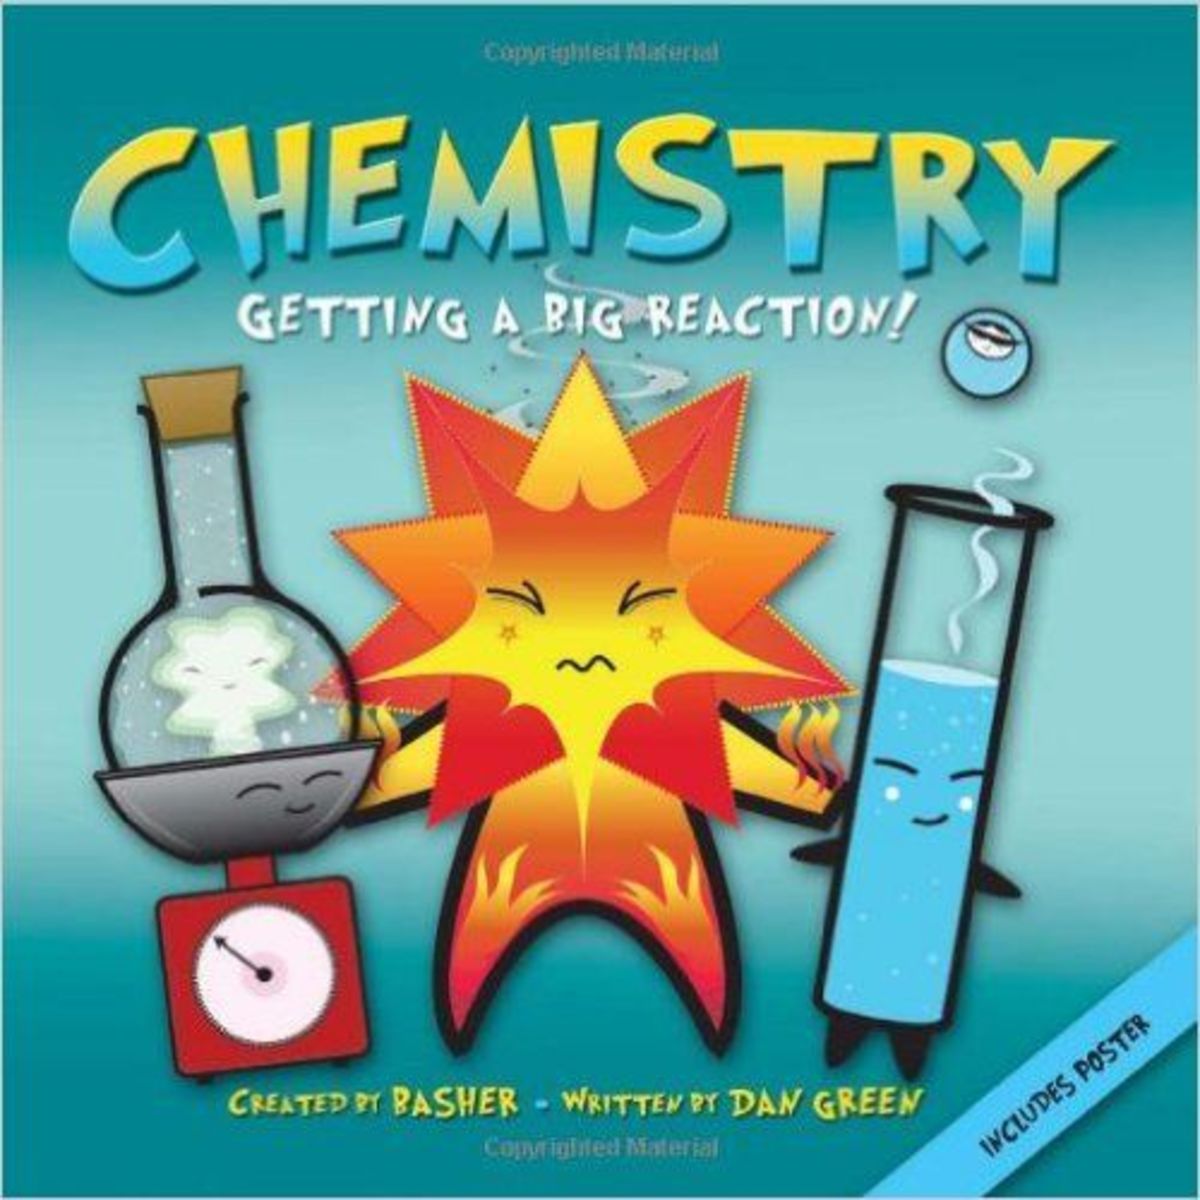 Best Introductory Science Books Series for Preschool and Elementary School Kids